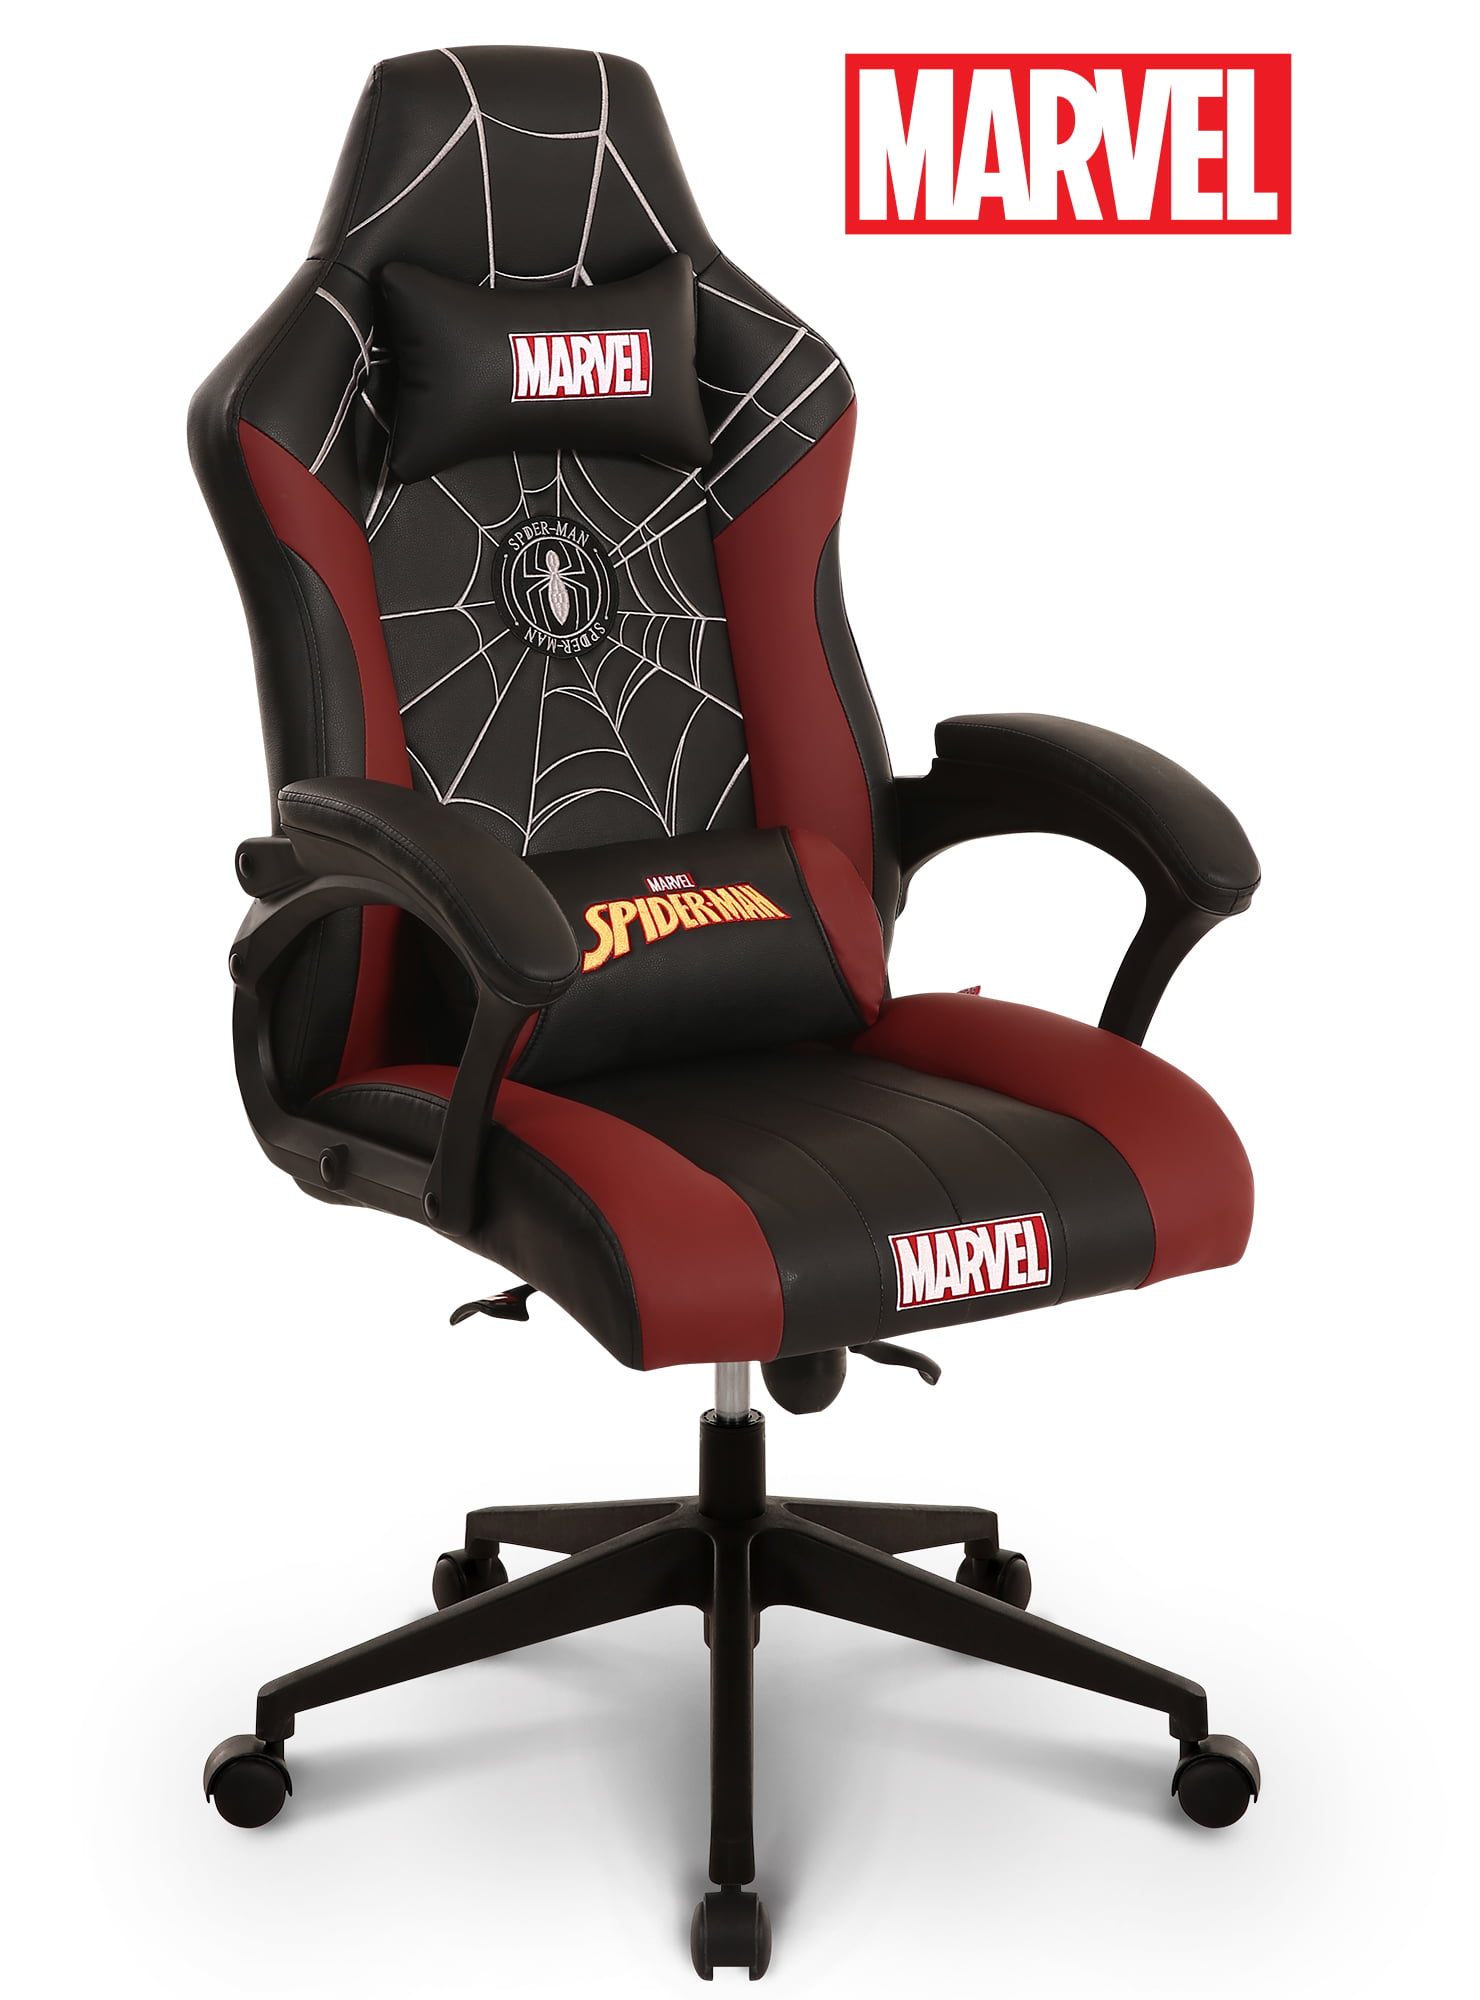 Licensed Marvel Gaming Racing Chair Executive Office Desk